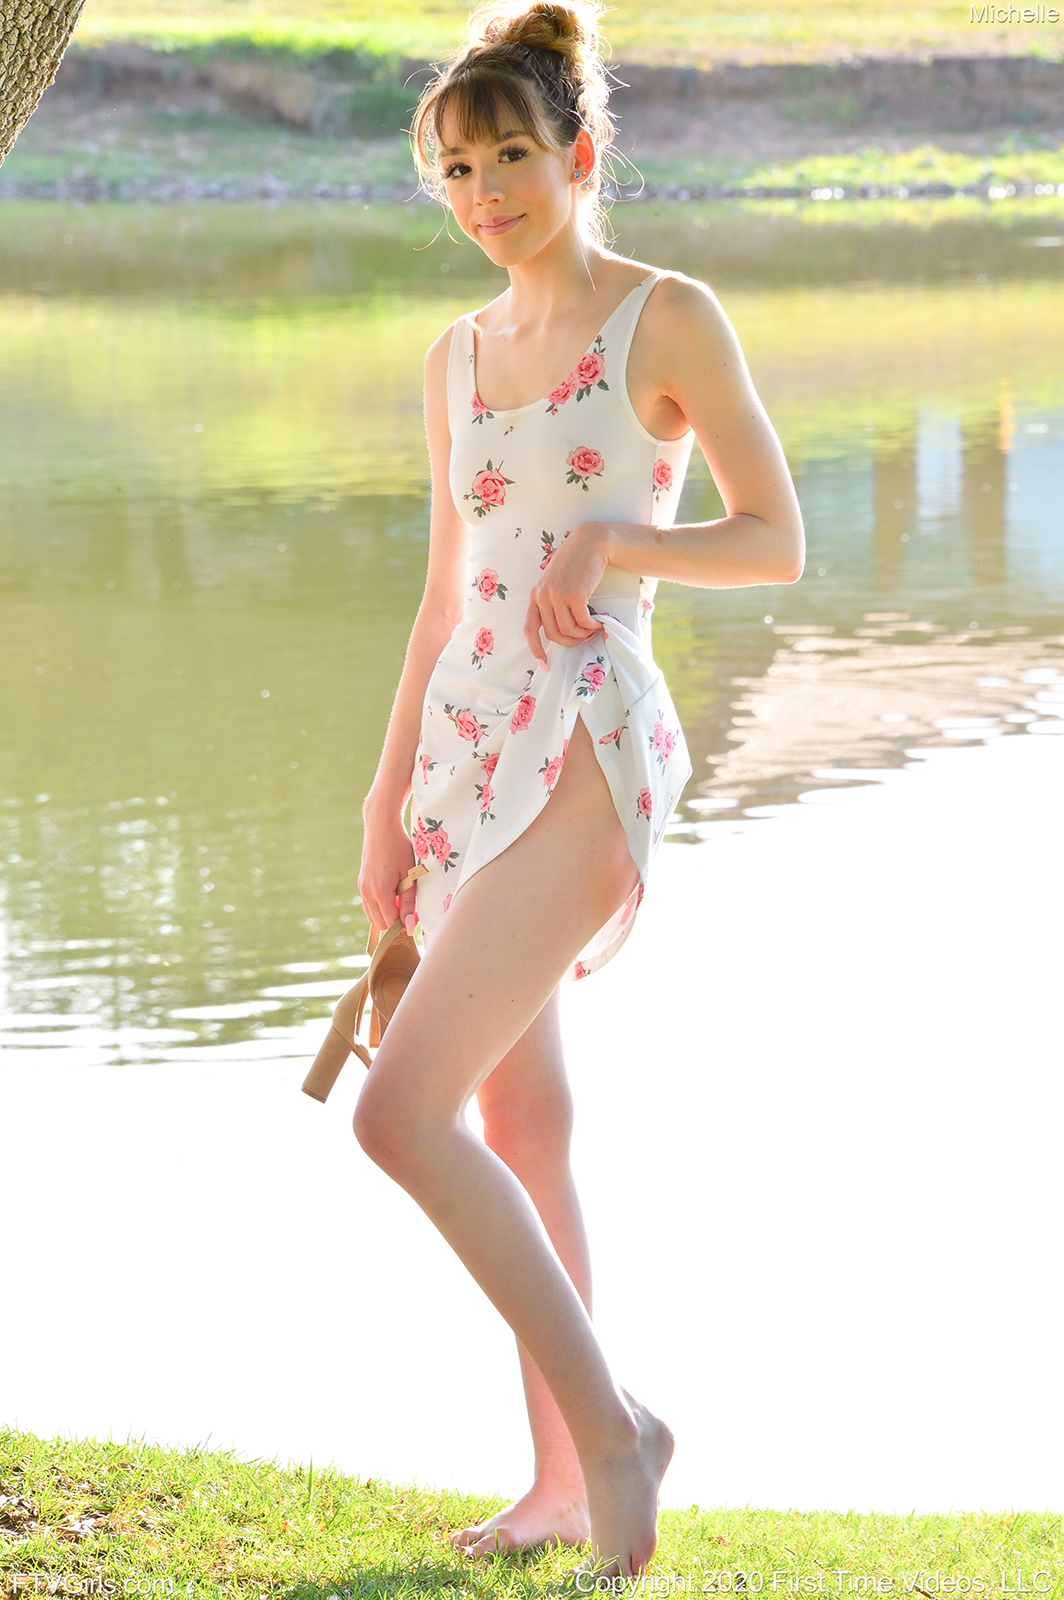 teen pornstar Michelle FTV is wearing a sexy floral skirt non nude while standing near a lake in Morning Teen Beauty